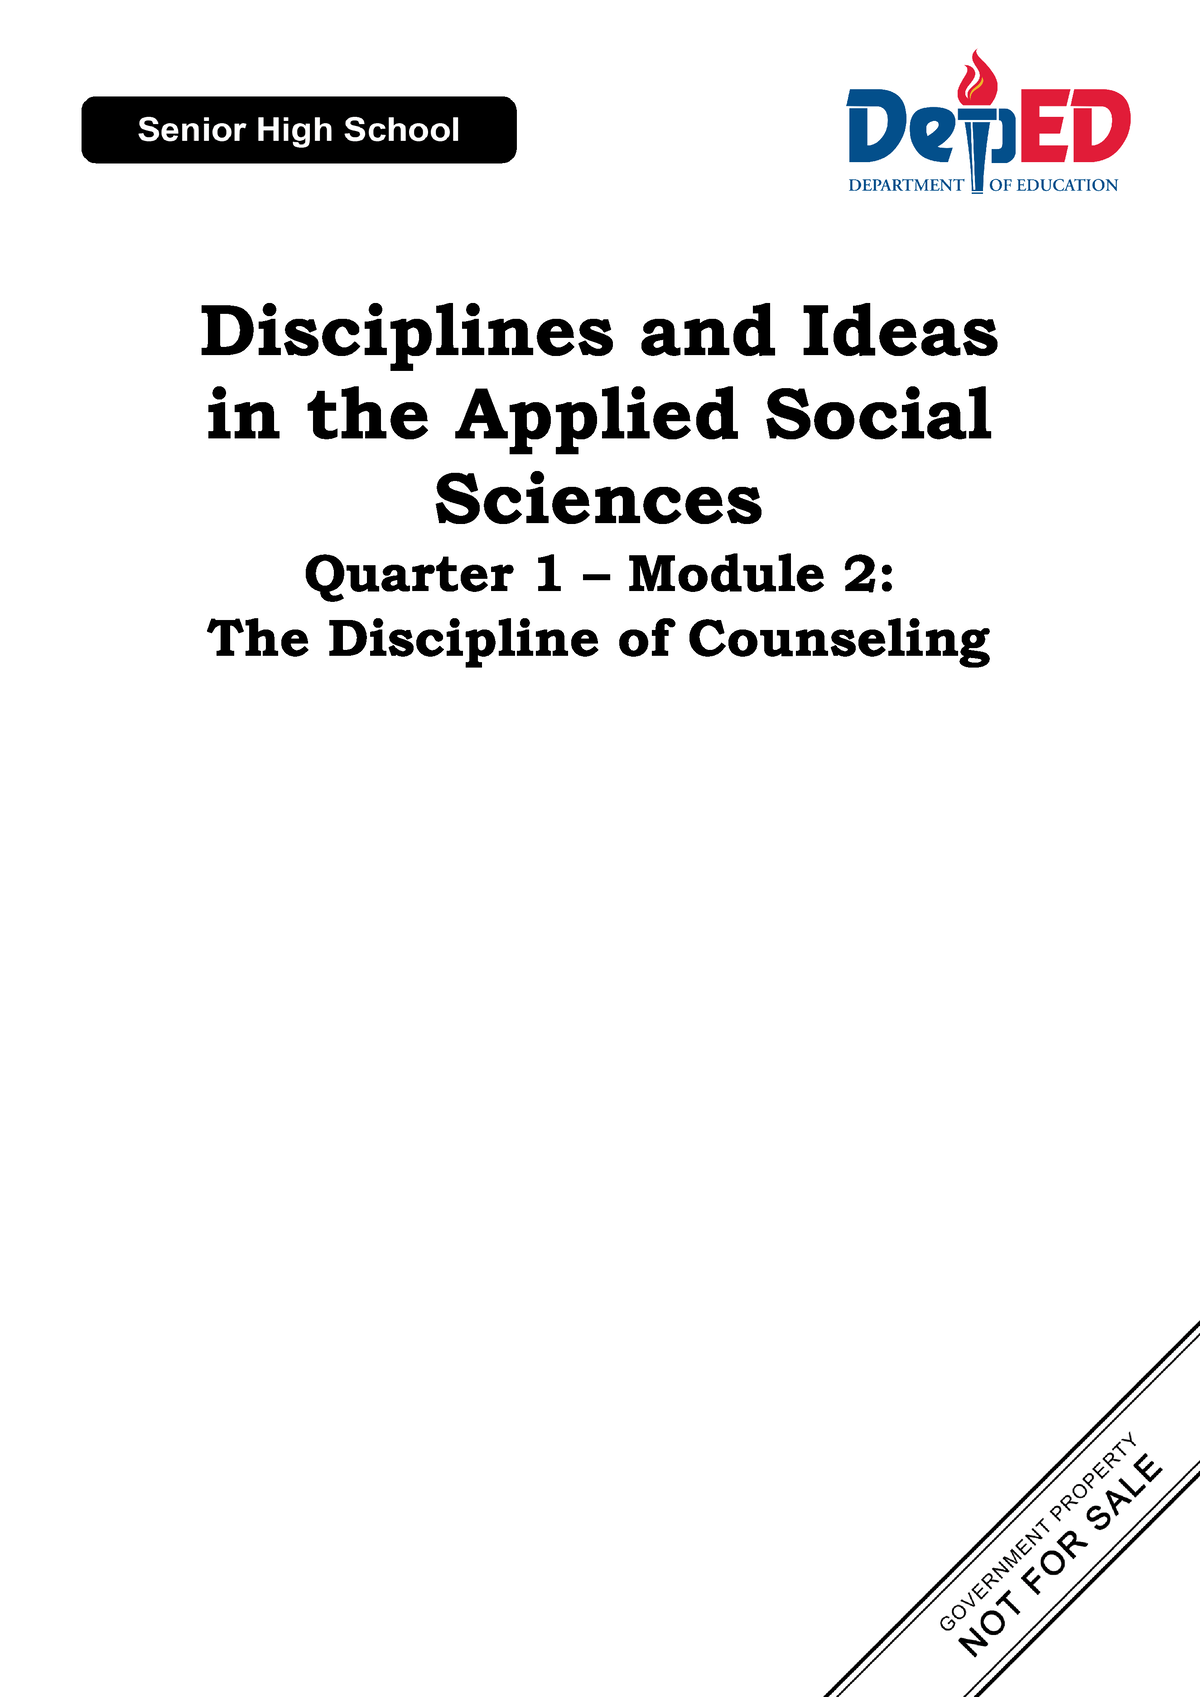 Diass- Module 2 - Disciplines and Ideas in the Applied Social Sciences ...